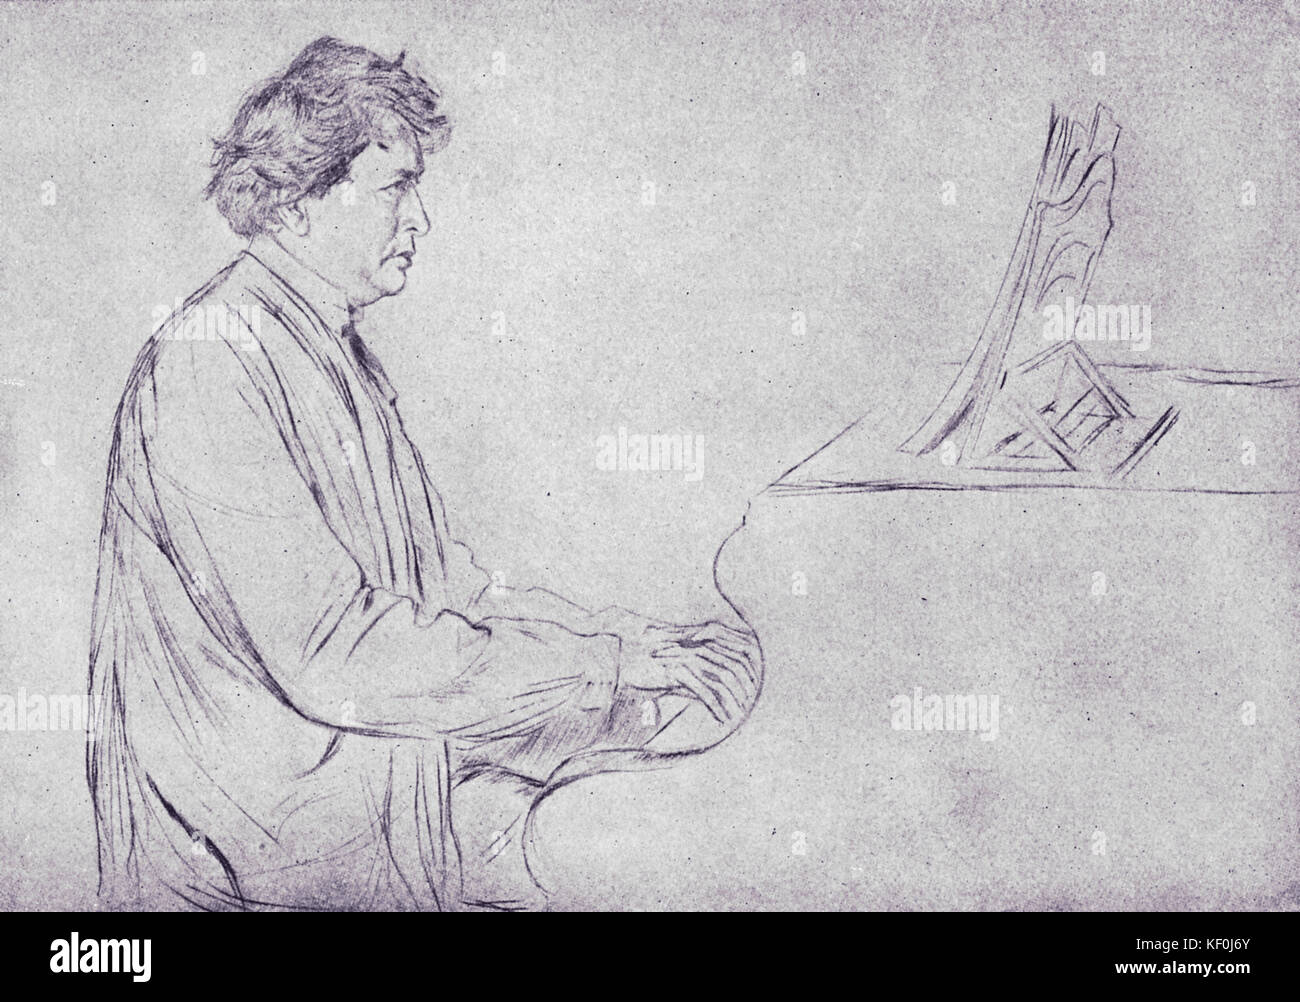 Ferruccio Busoni at piano, sketch by by Ernst  Oppler.  Italian-German pianist and composer, 1 April 1866 - 27 July 1924 Stock Photo